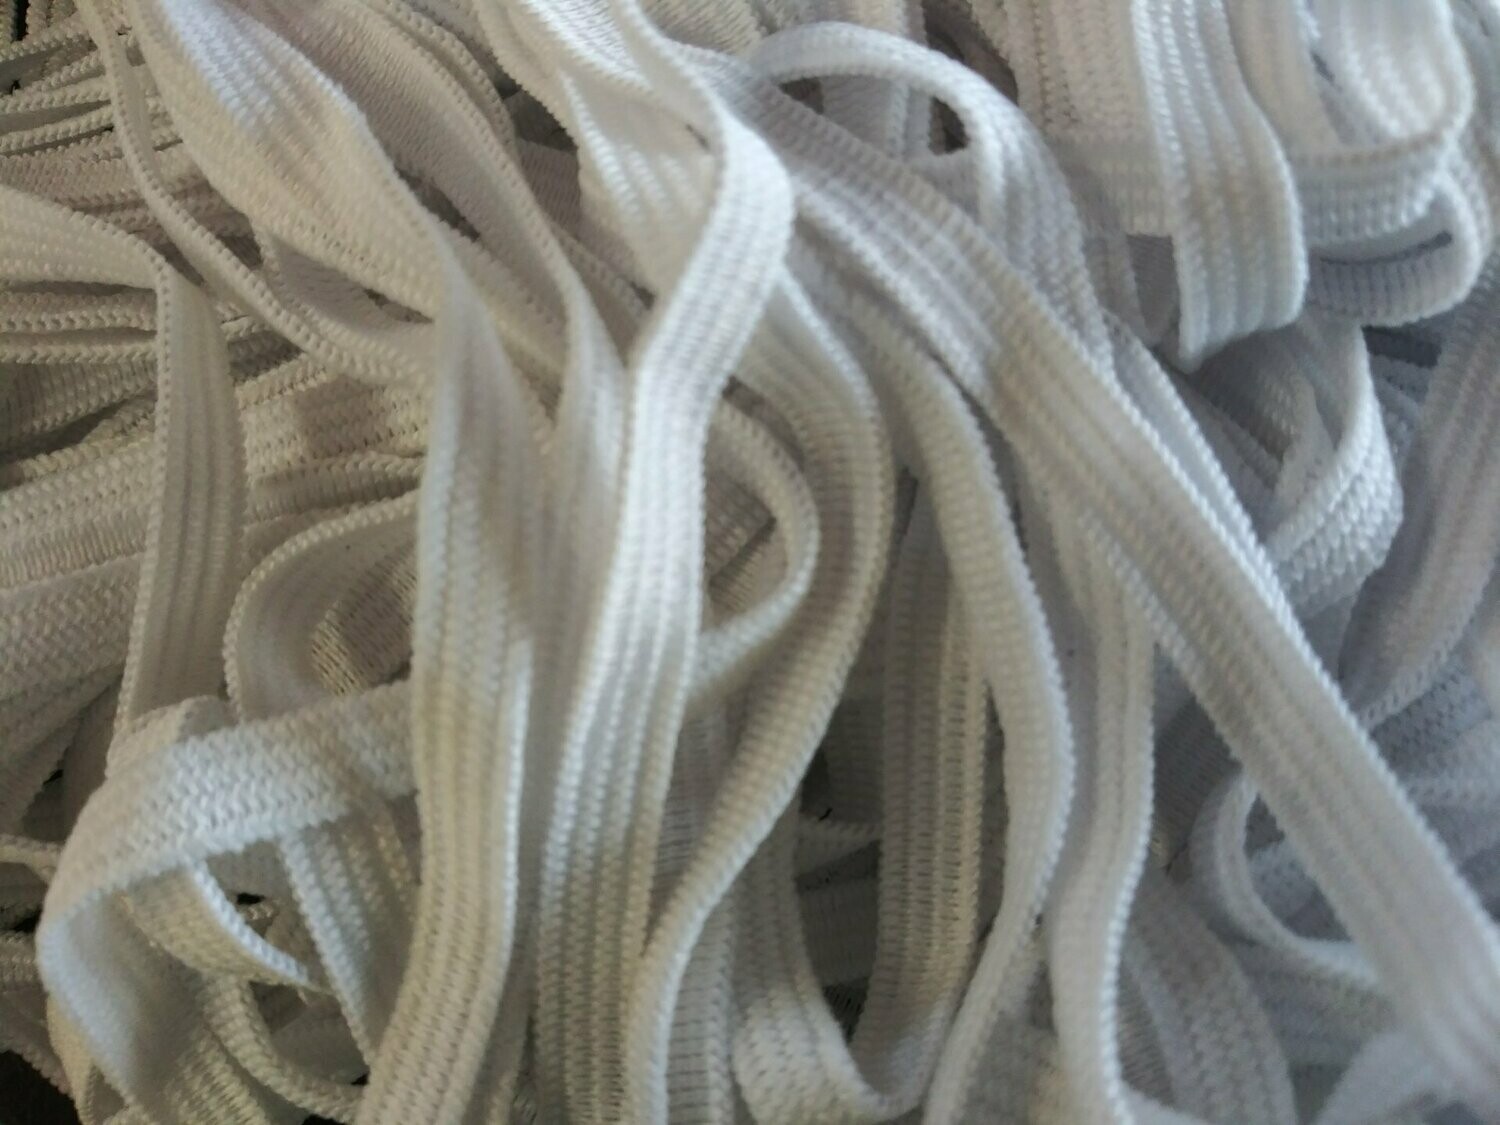 1/4" White Elastic, .29 Cents Per Yard, Available in 25, 50, or 100 Yard Increments